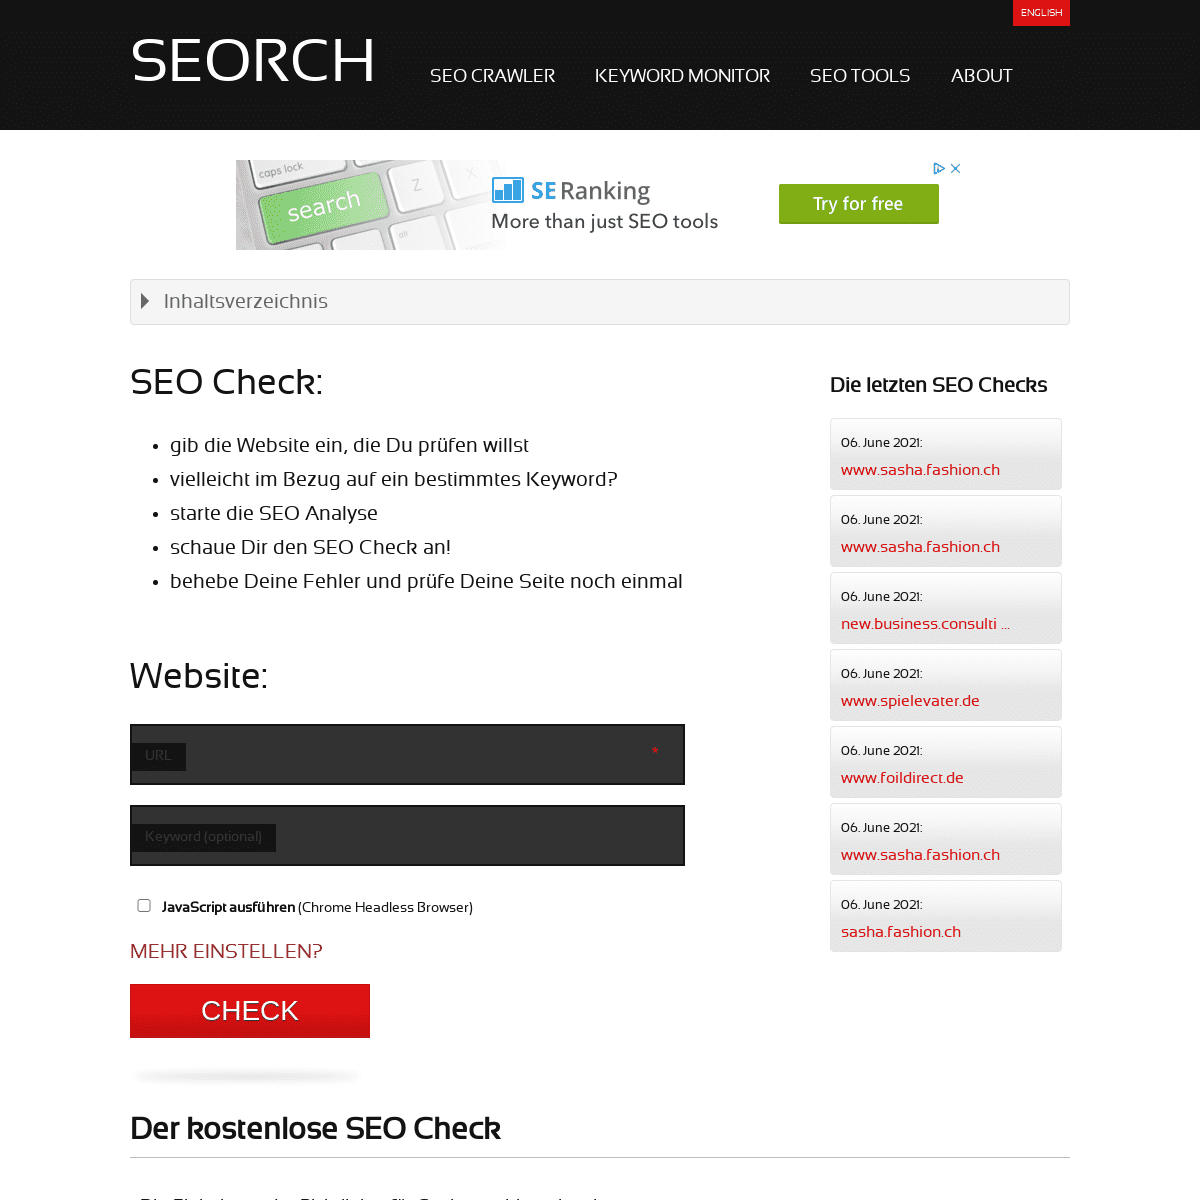 A complete backup of https://seorch.de